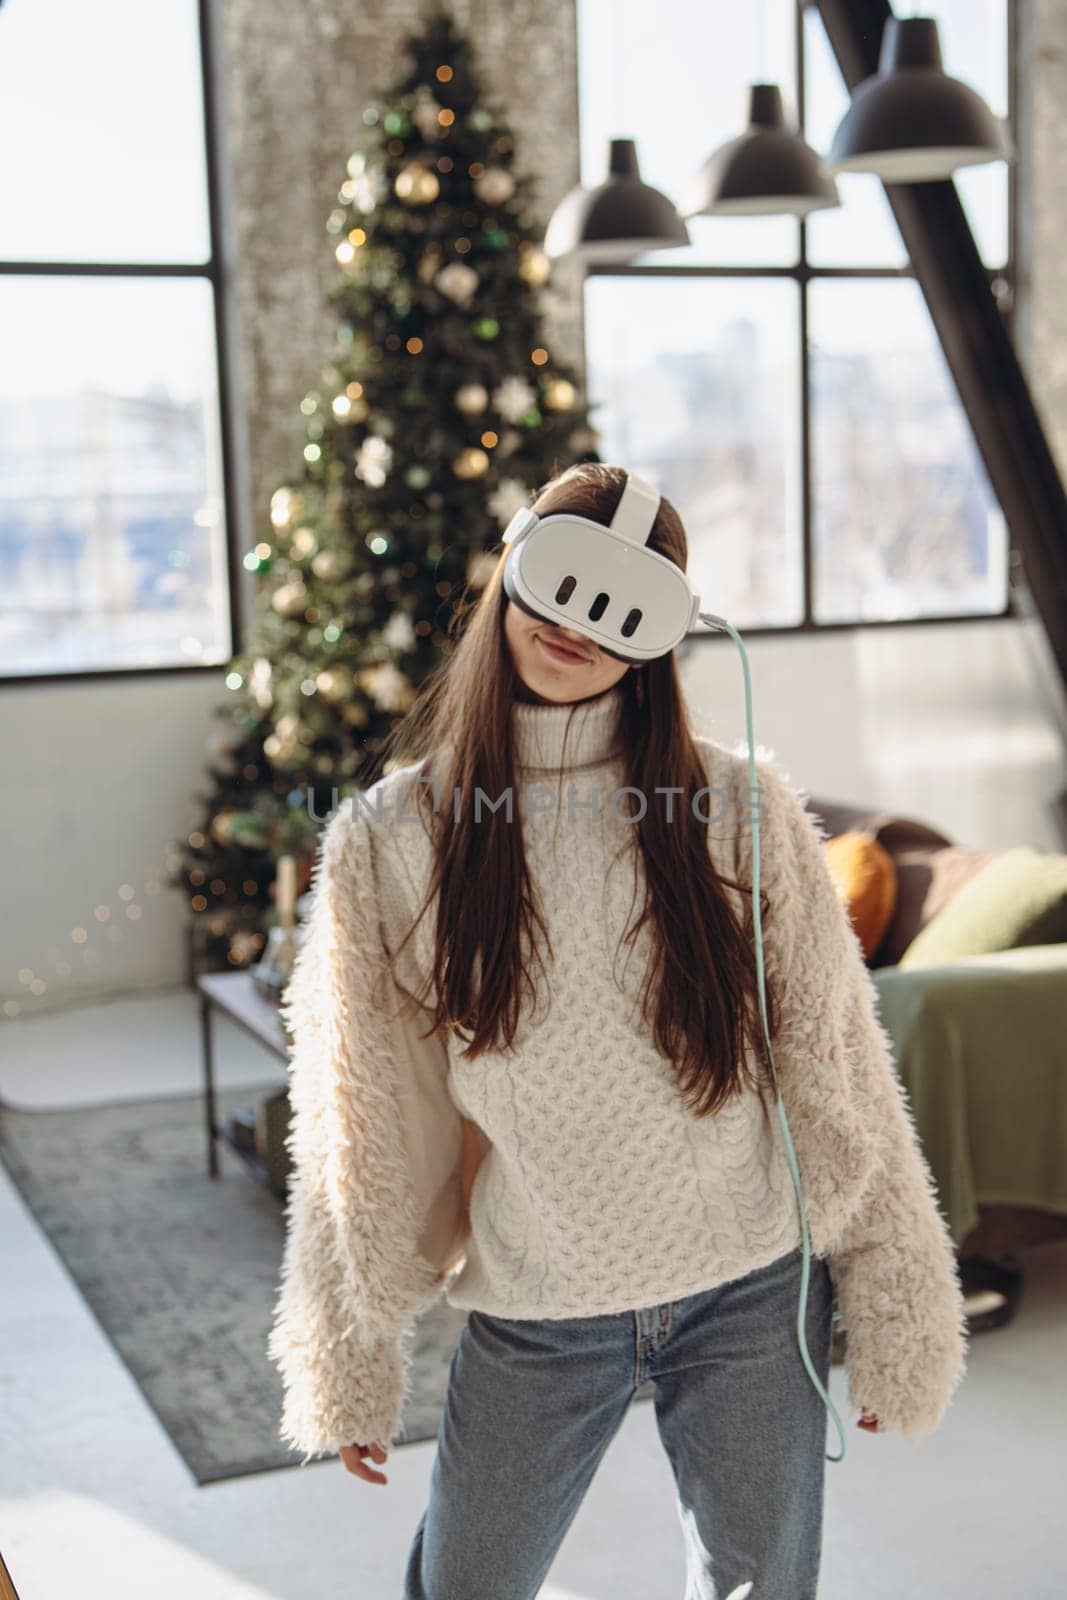 Immersed in virtual reality, a beautiful young woman stands beside a Christmas tree. by teksomolika